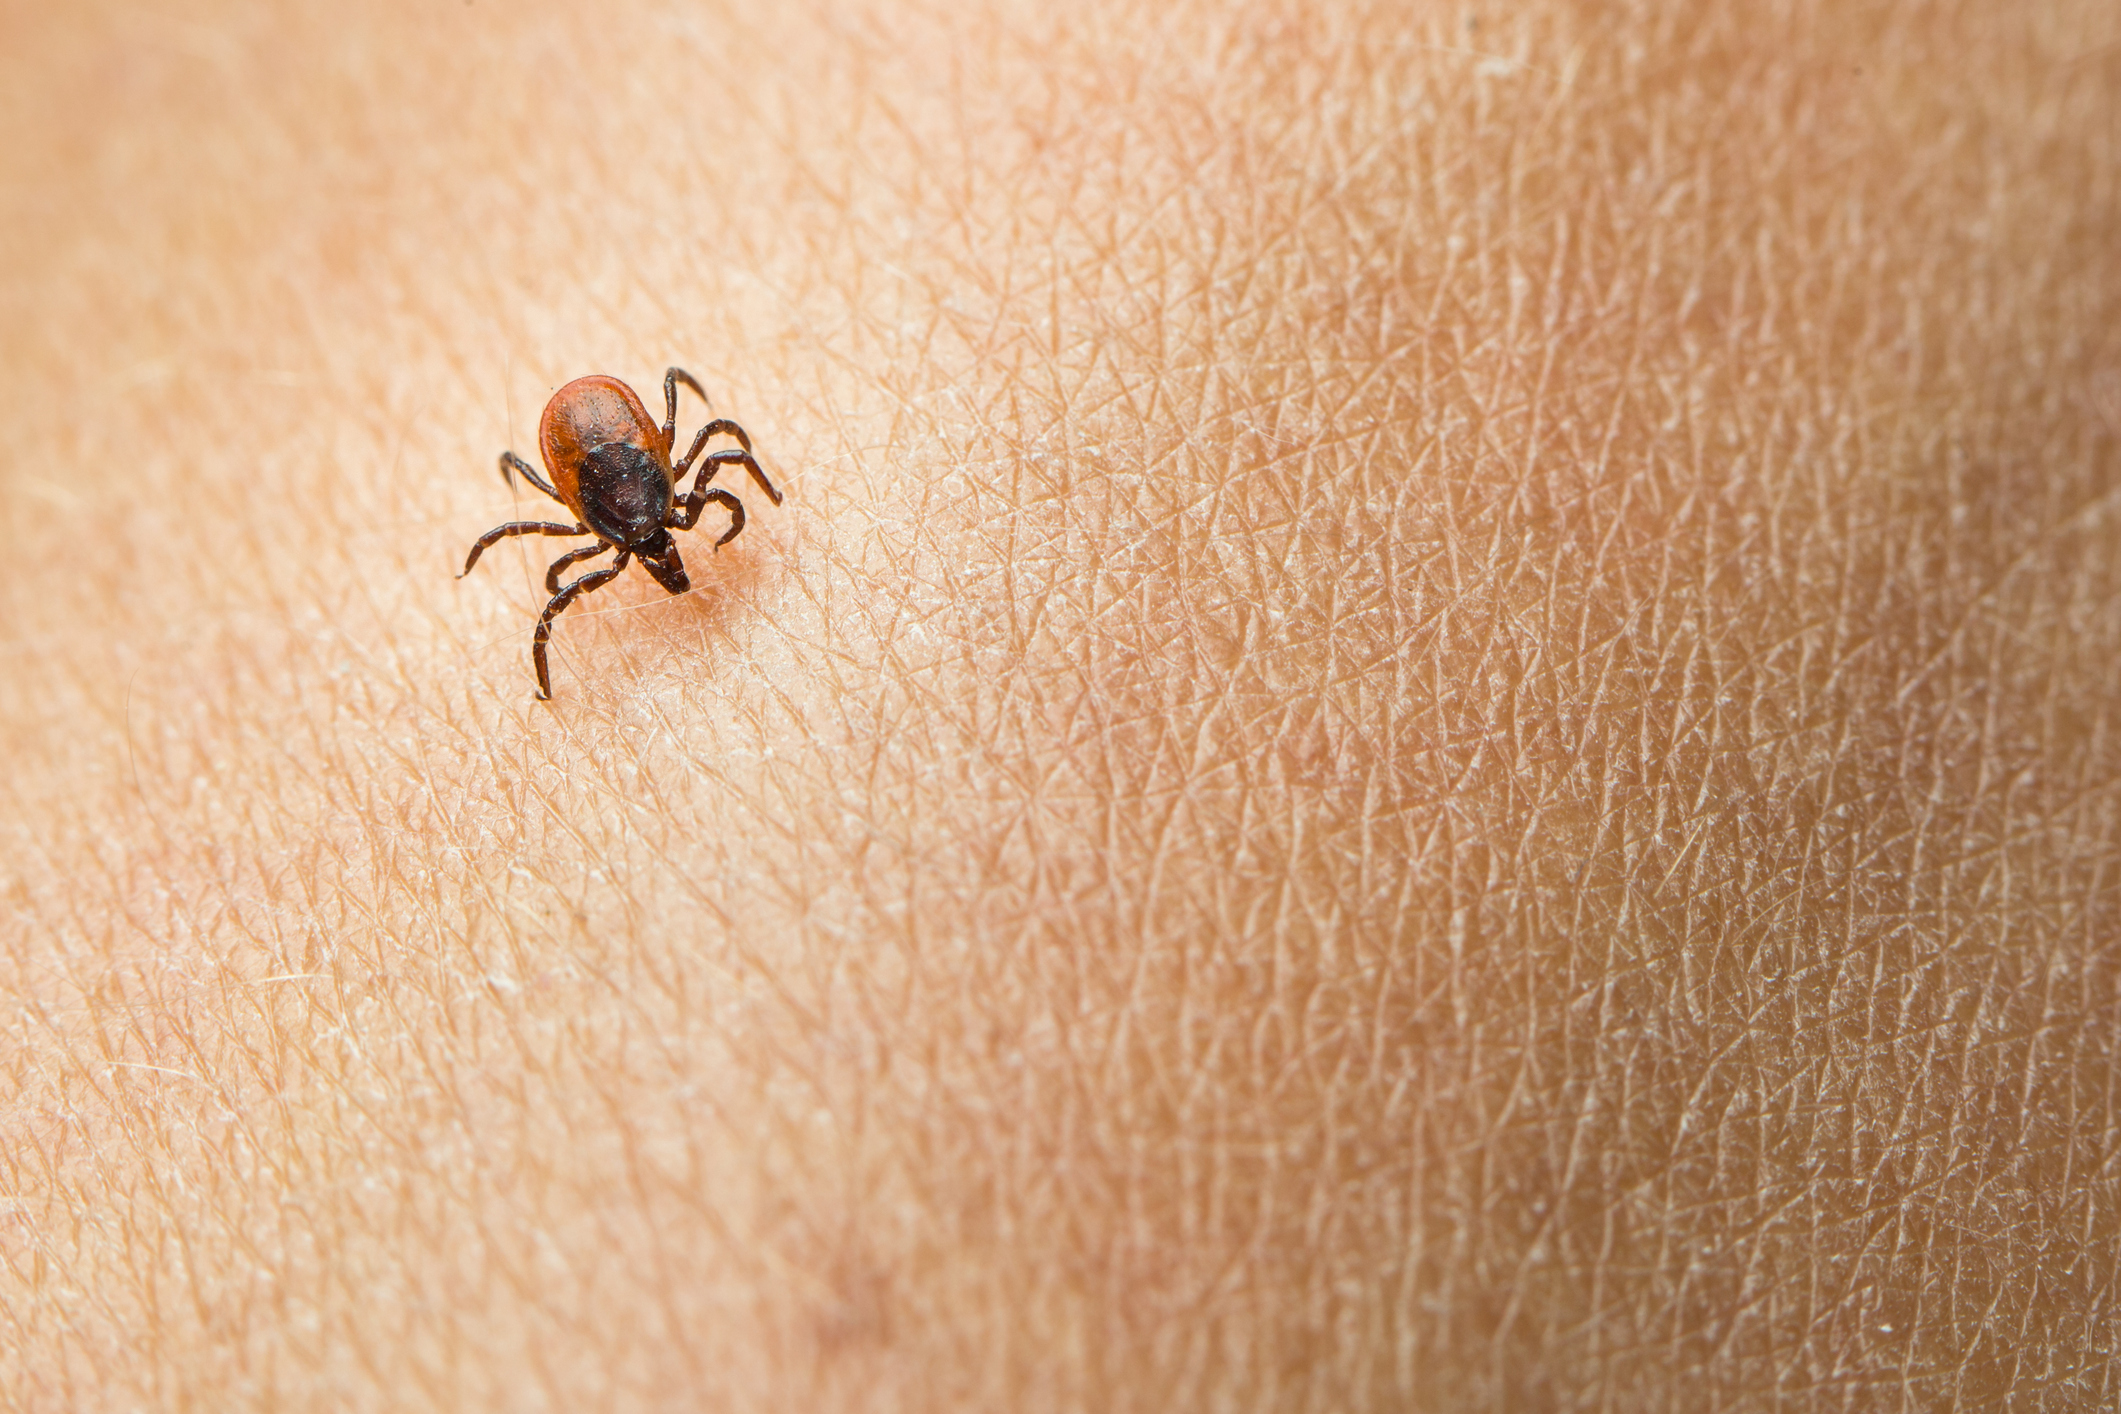 7 tips to prevent Lyme disease, ...